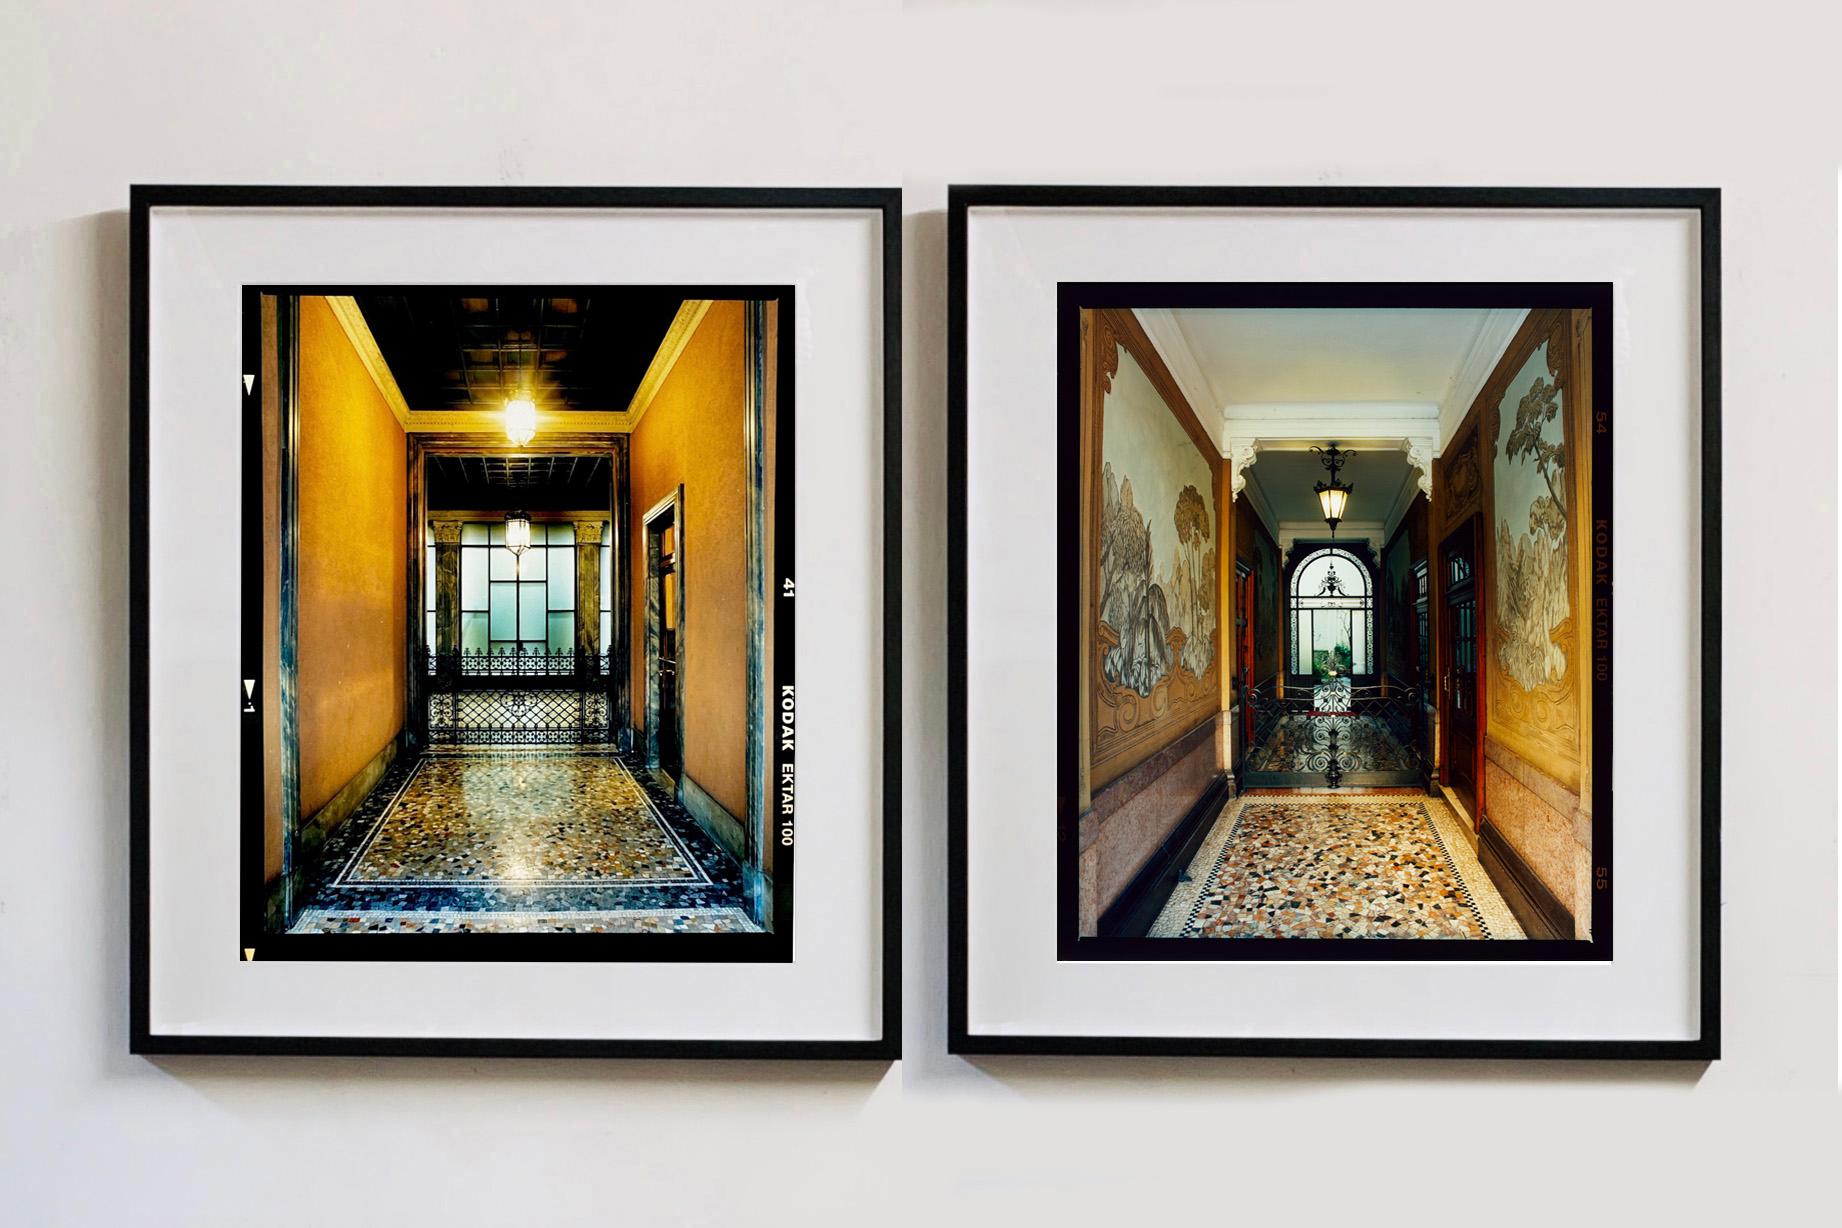 Foyer VI, from Richard Heeps series A Short History of Milan which began as a special project for the 2018 Affordable Art Fair Milan. It was well received and the artwork has become popular with art buyers around the world. Richard continues to add